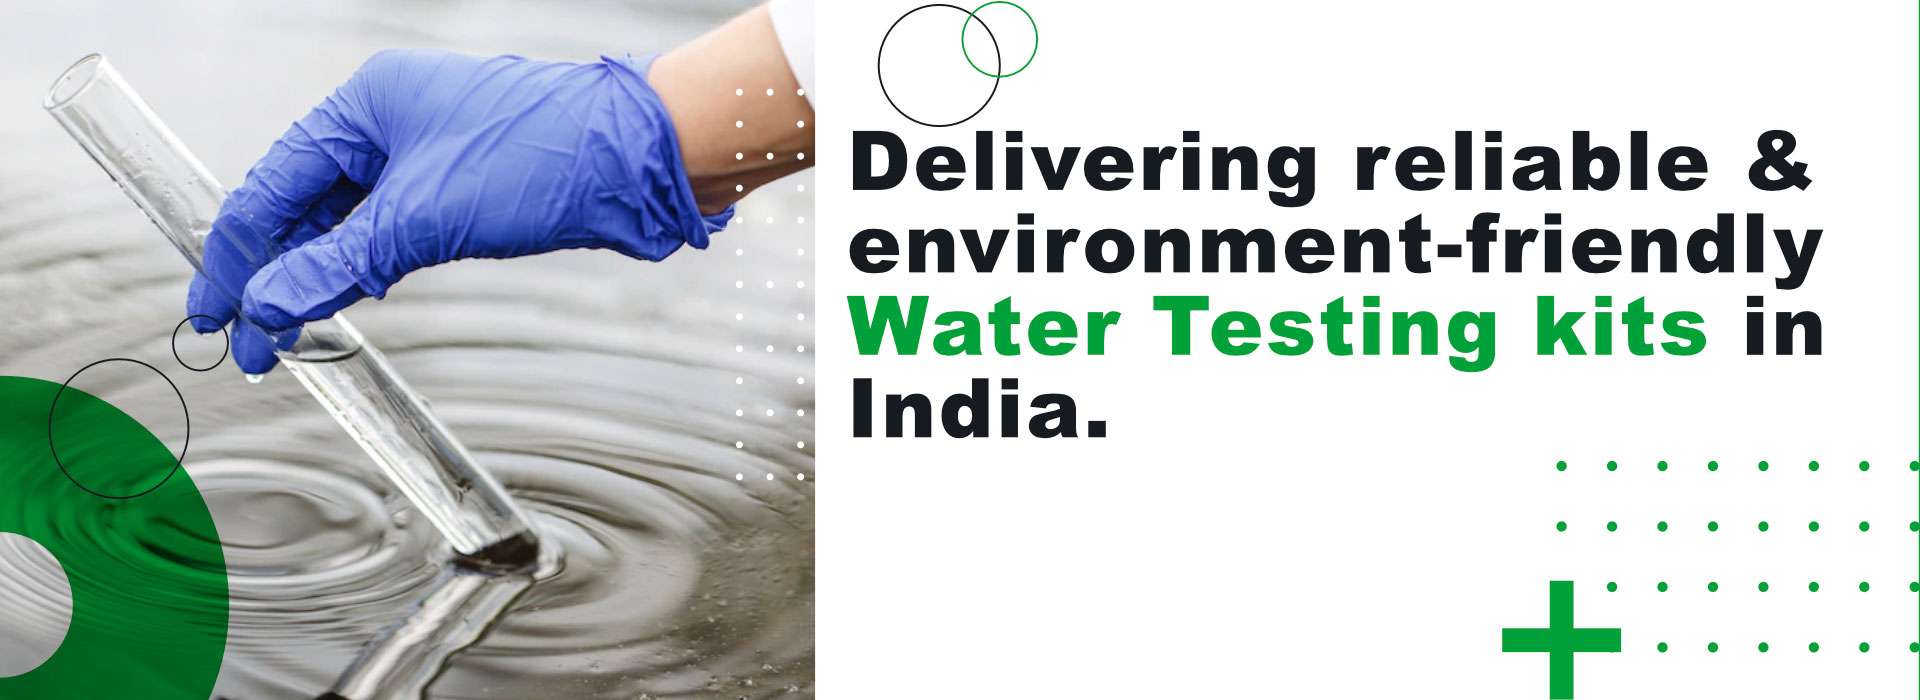  Delivering reliable & environment-friendly water Testing kits in India Manufacturers in Agartala